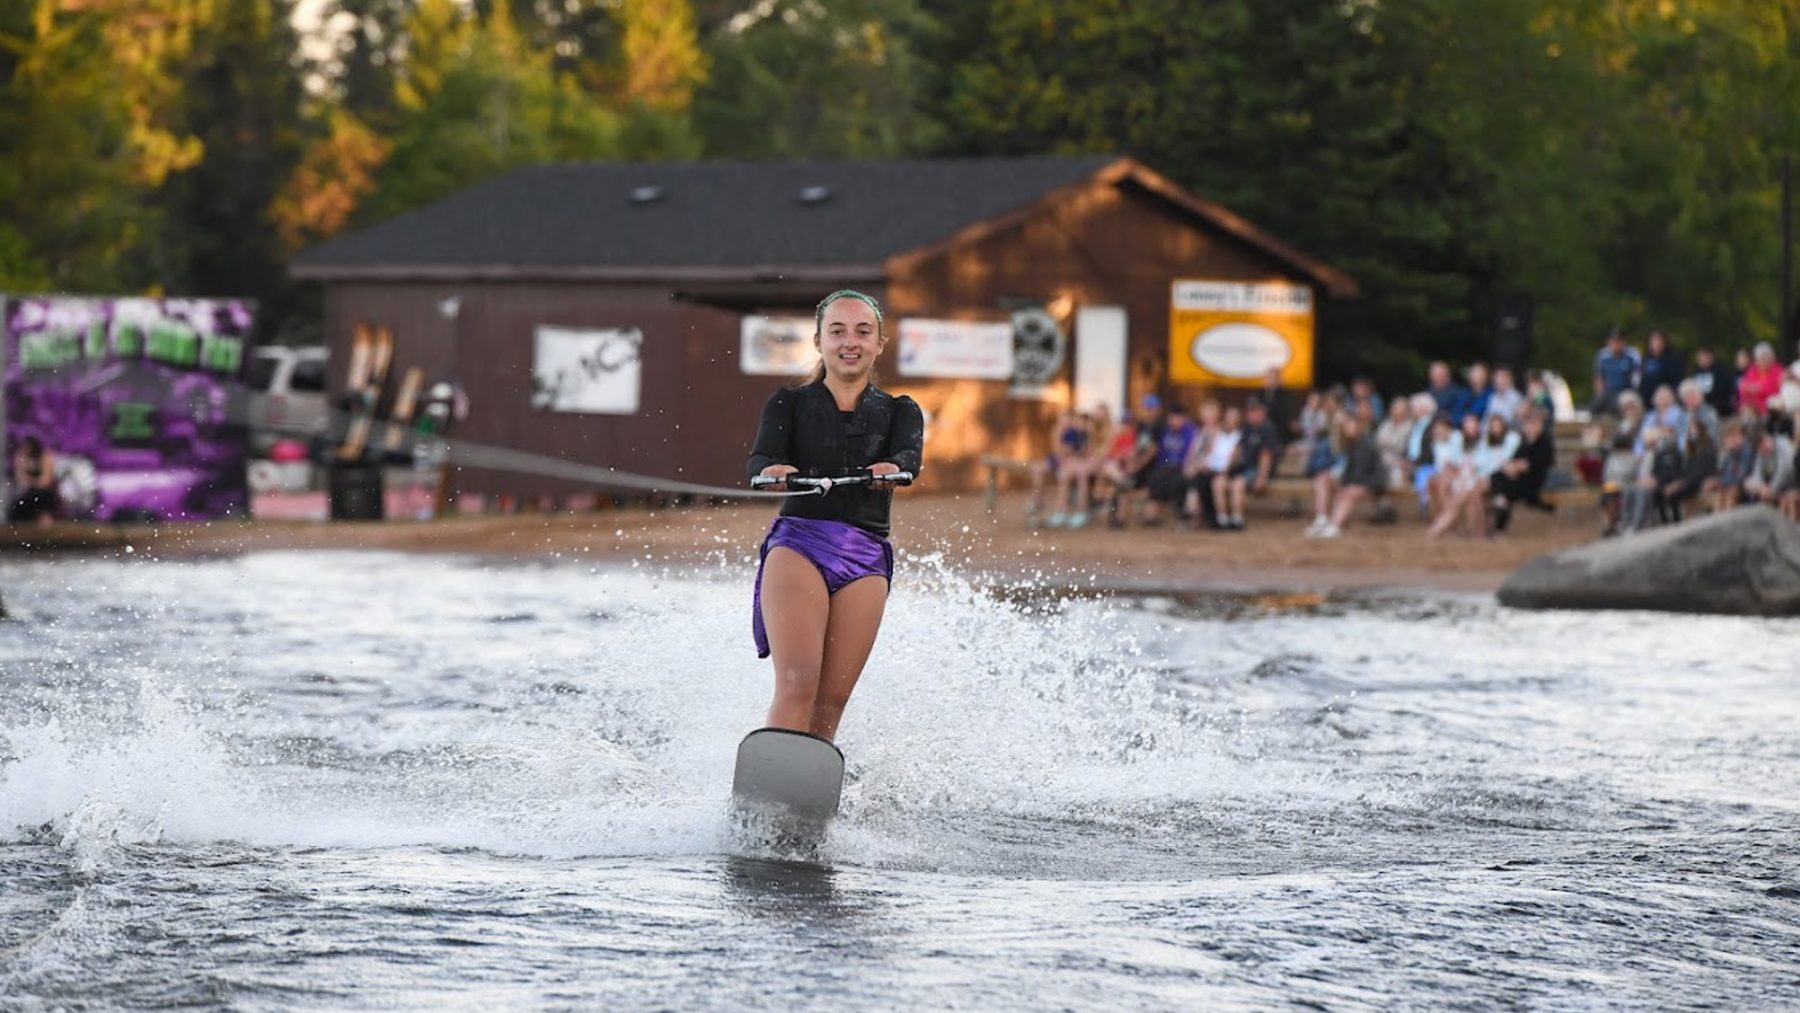 Article: Enjoy northern Wisconsin’s waterski shows this summer | Chain Skimmers Waterski Show Conover WI